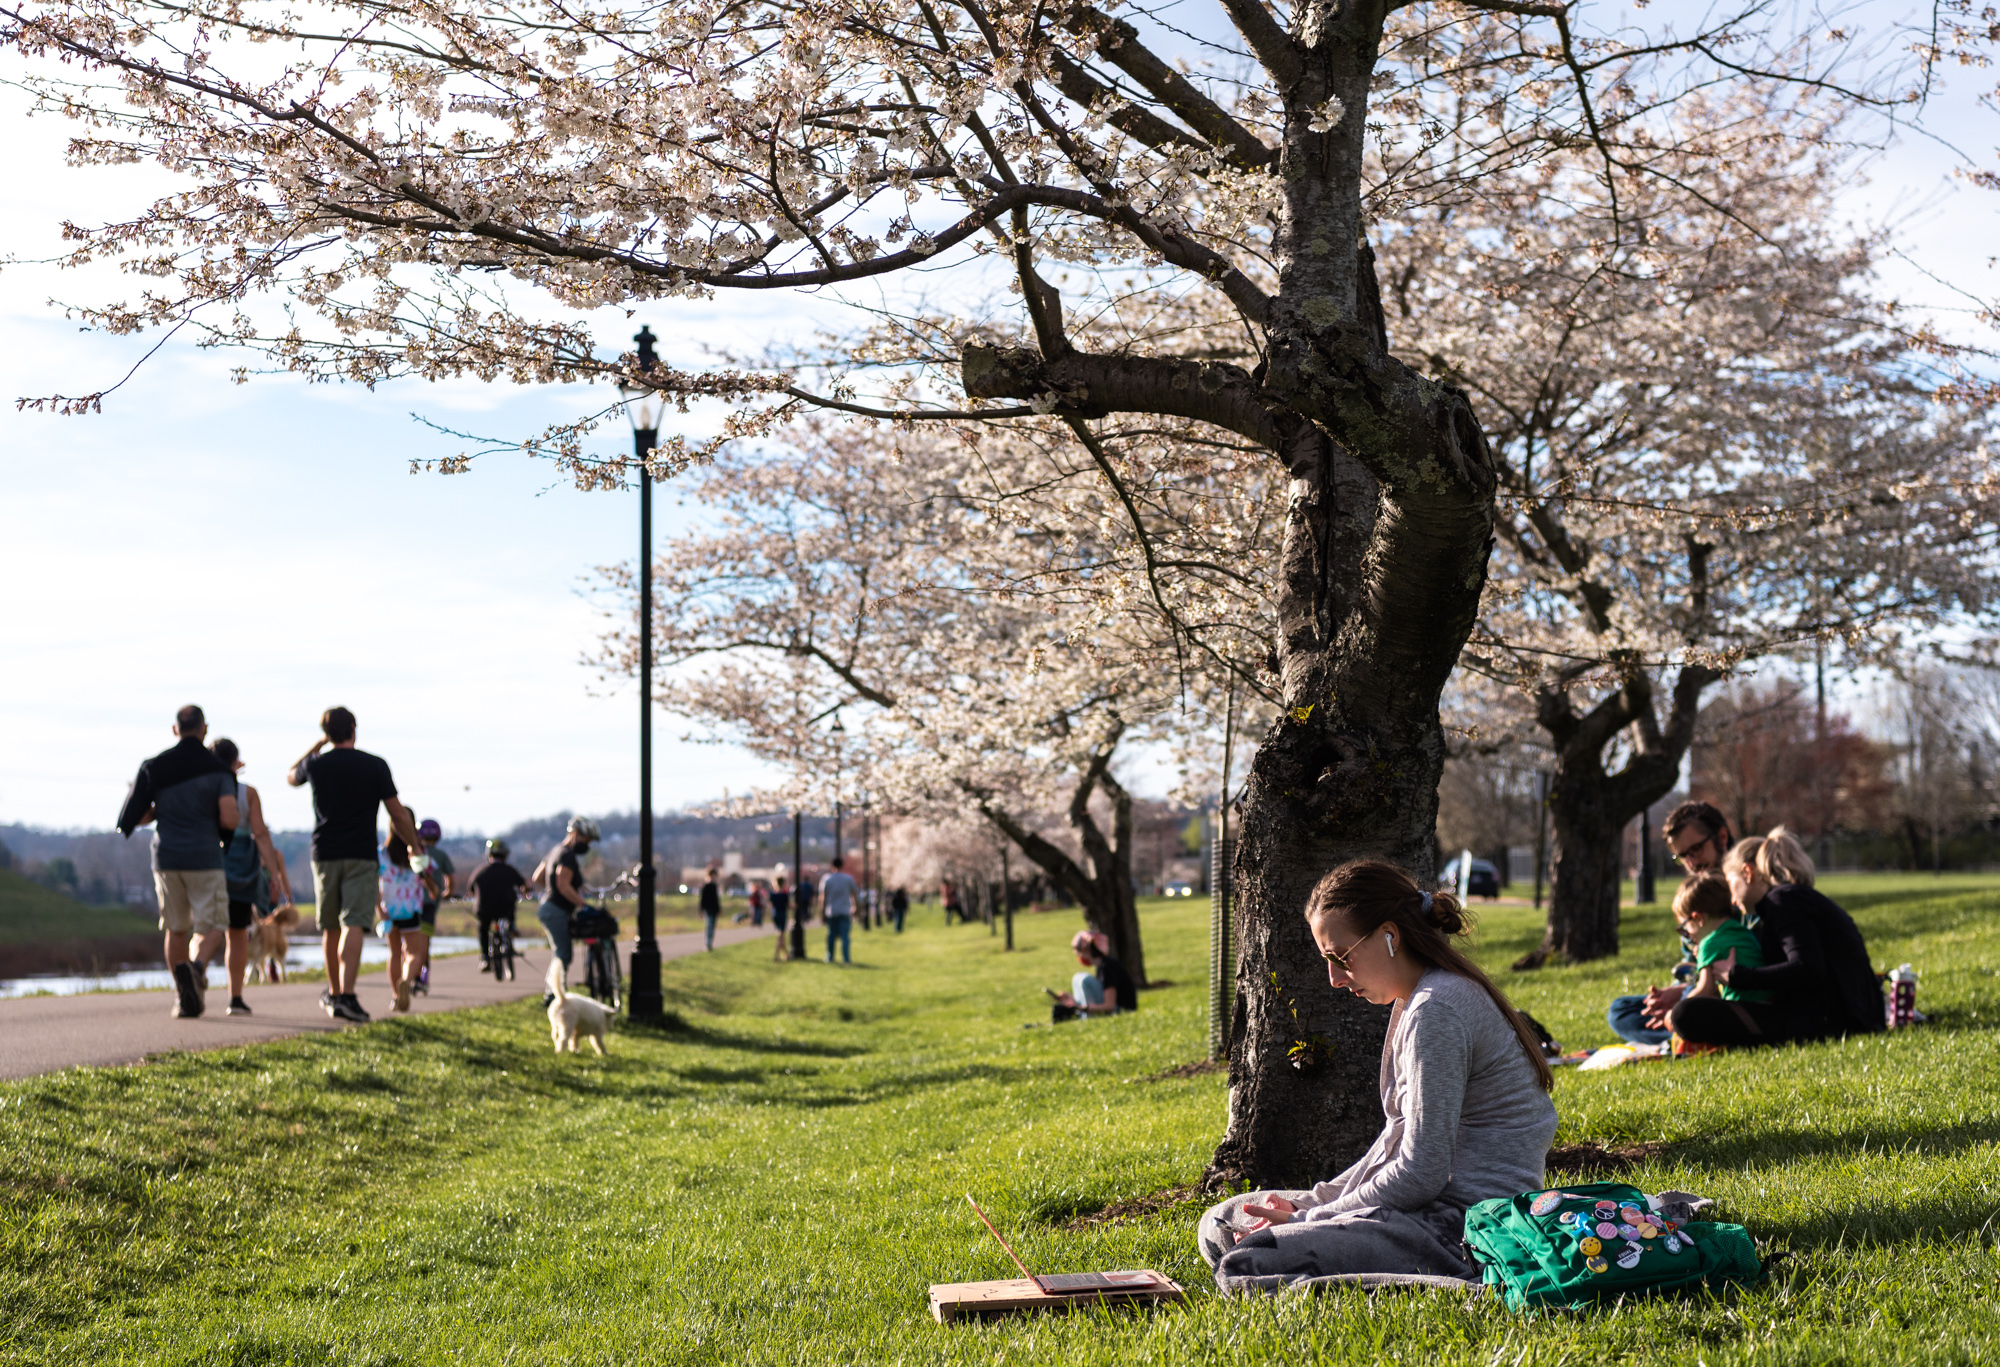 Many people outdoors enjoying the blooming Cherry Blossom trees